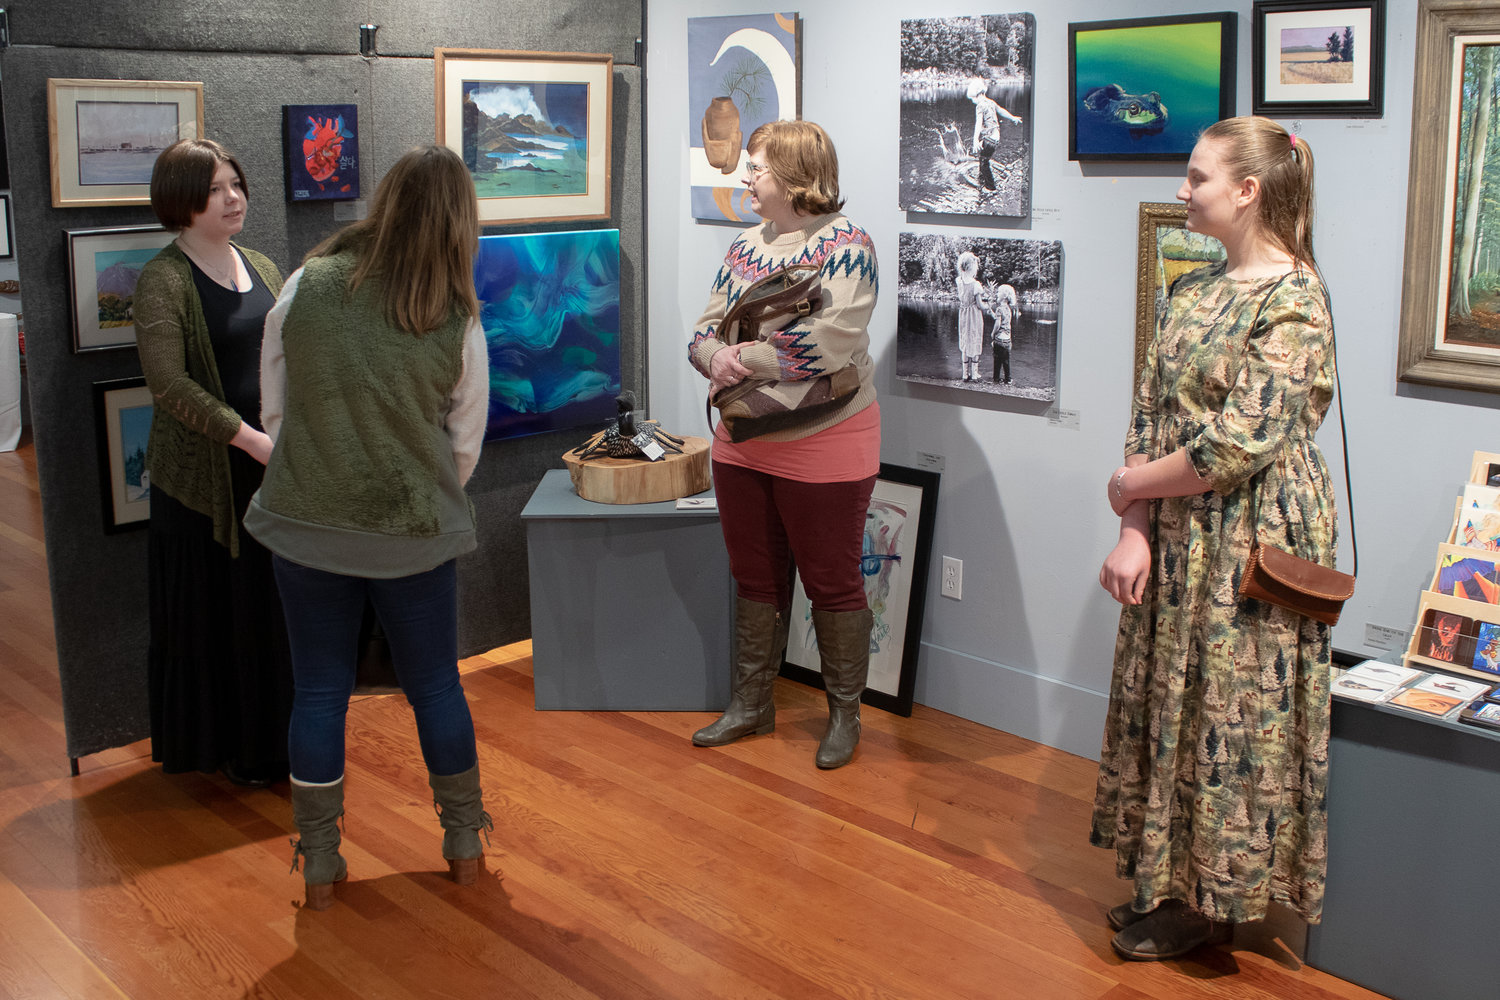 Enaliya Rubin, right, and Acacia Senn, left, answer questioned from gallery viewers about their work currently on display at the Rectangle Gallery & Creative Space.